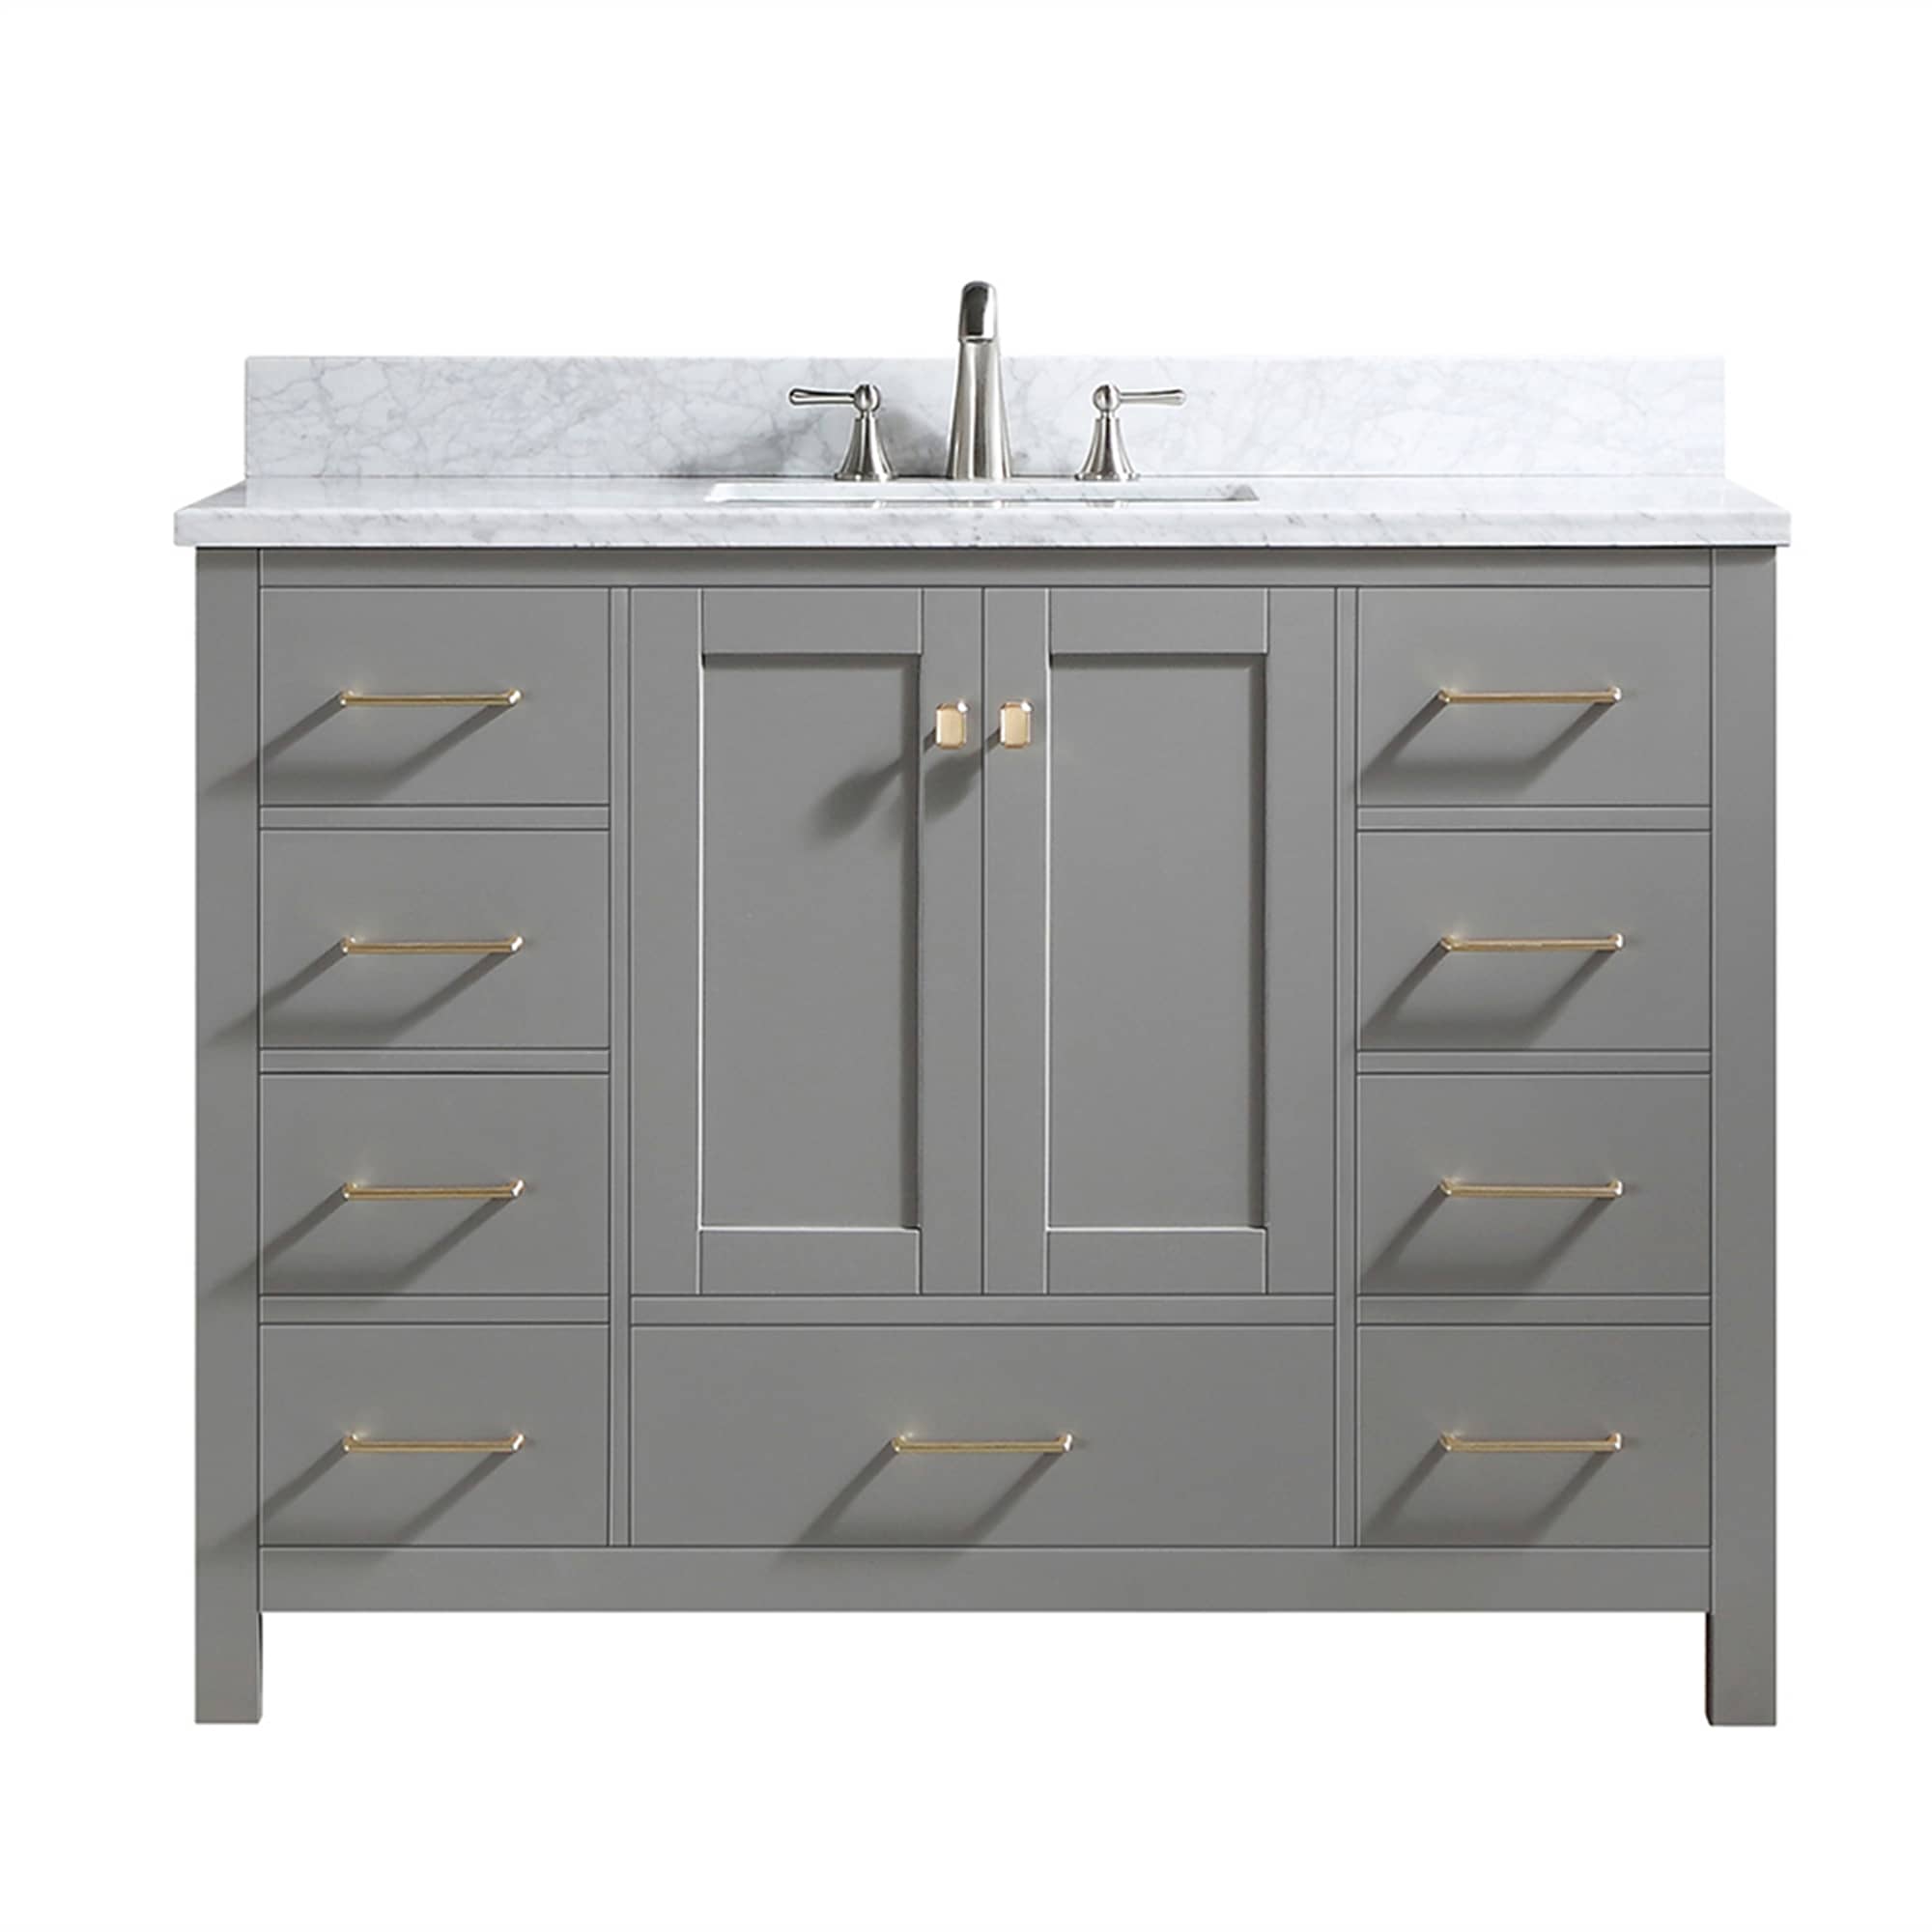 CASAINC 48 Inch Bath Vanity in Gray with White Top and Basin ( 48W x 22D x 35.4"H )-Casainc Canada